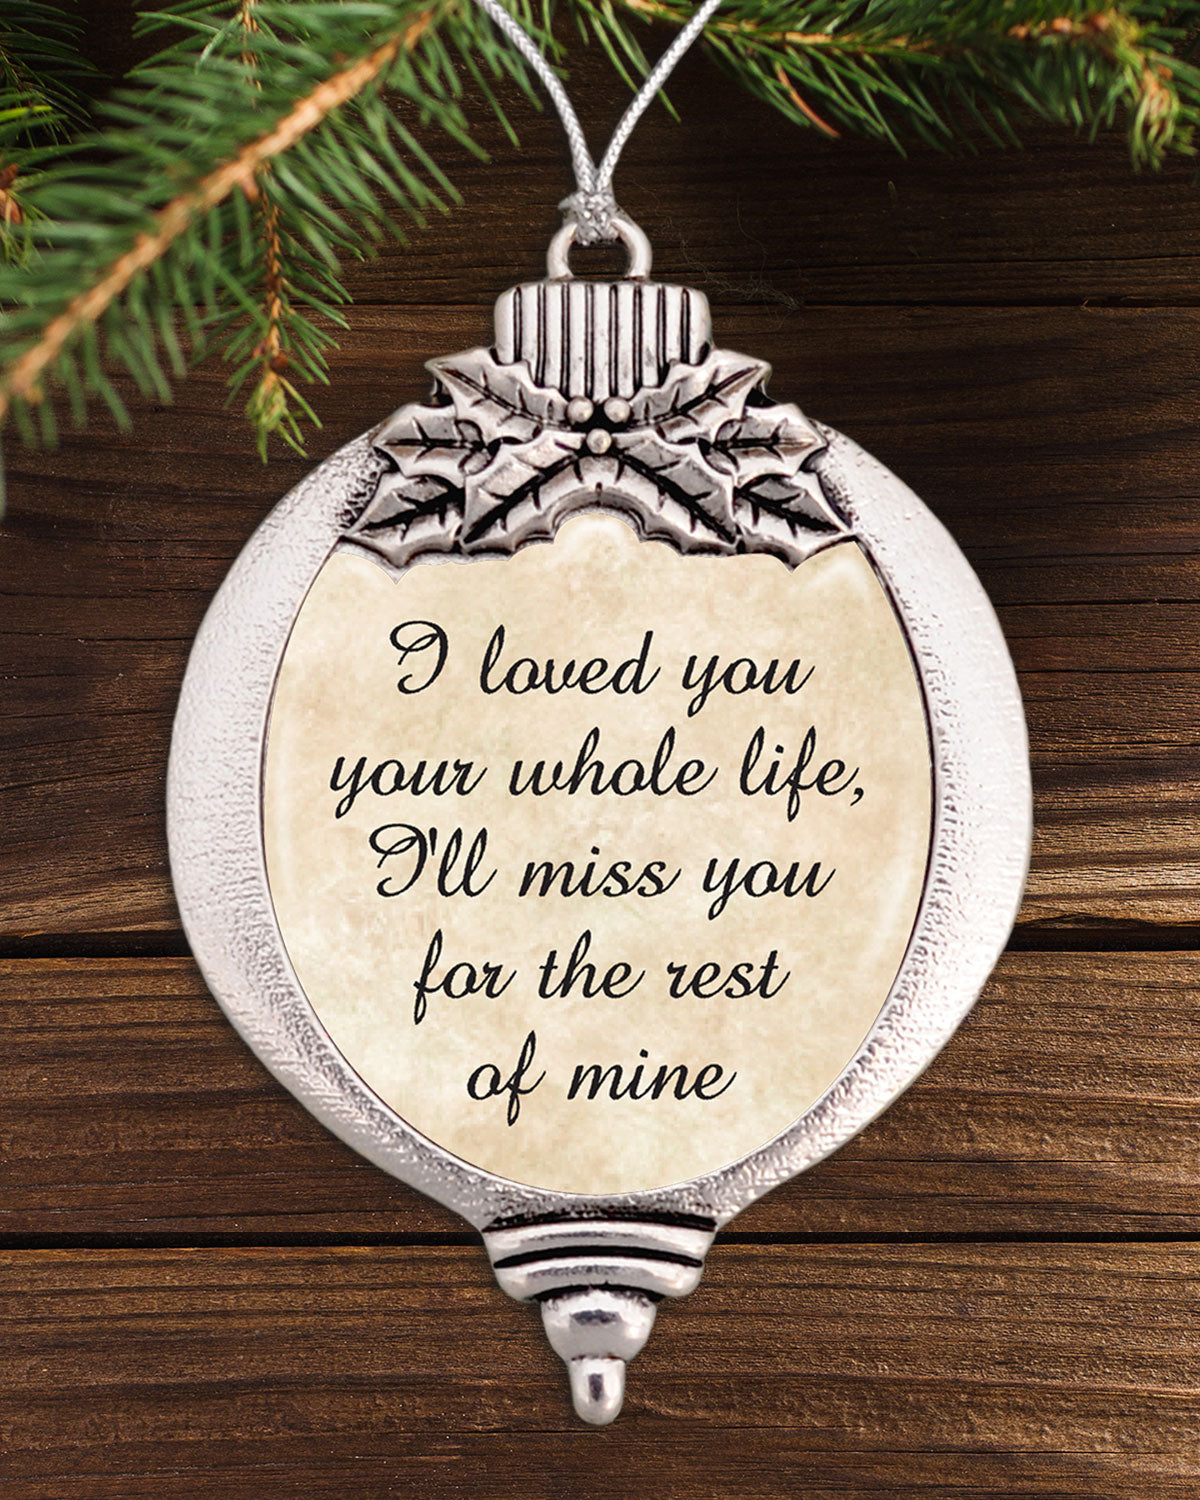 I Have Loved You Your Whole Life Bulb Ornament